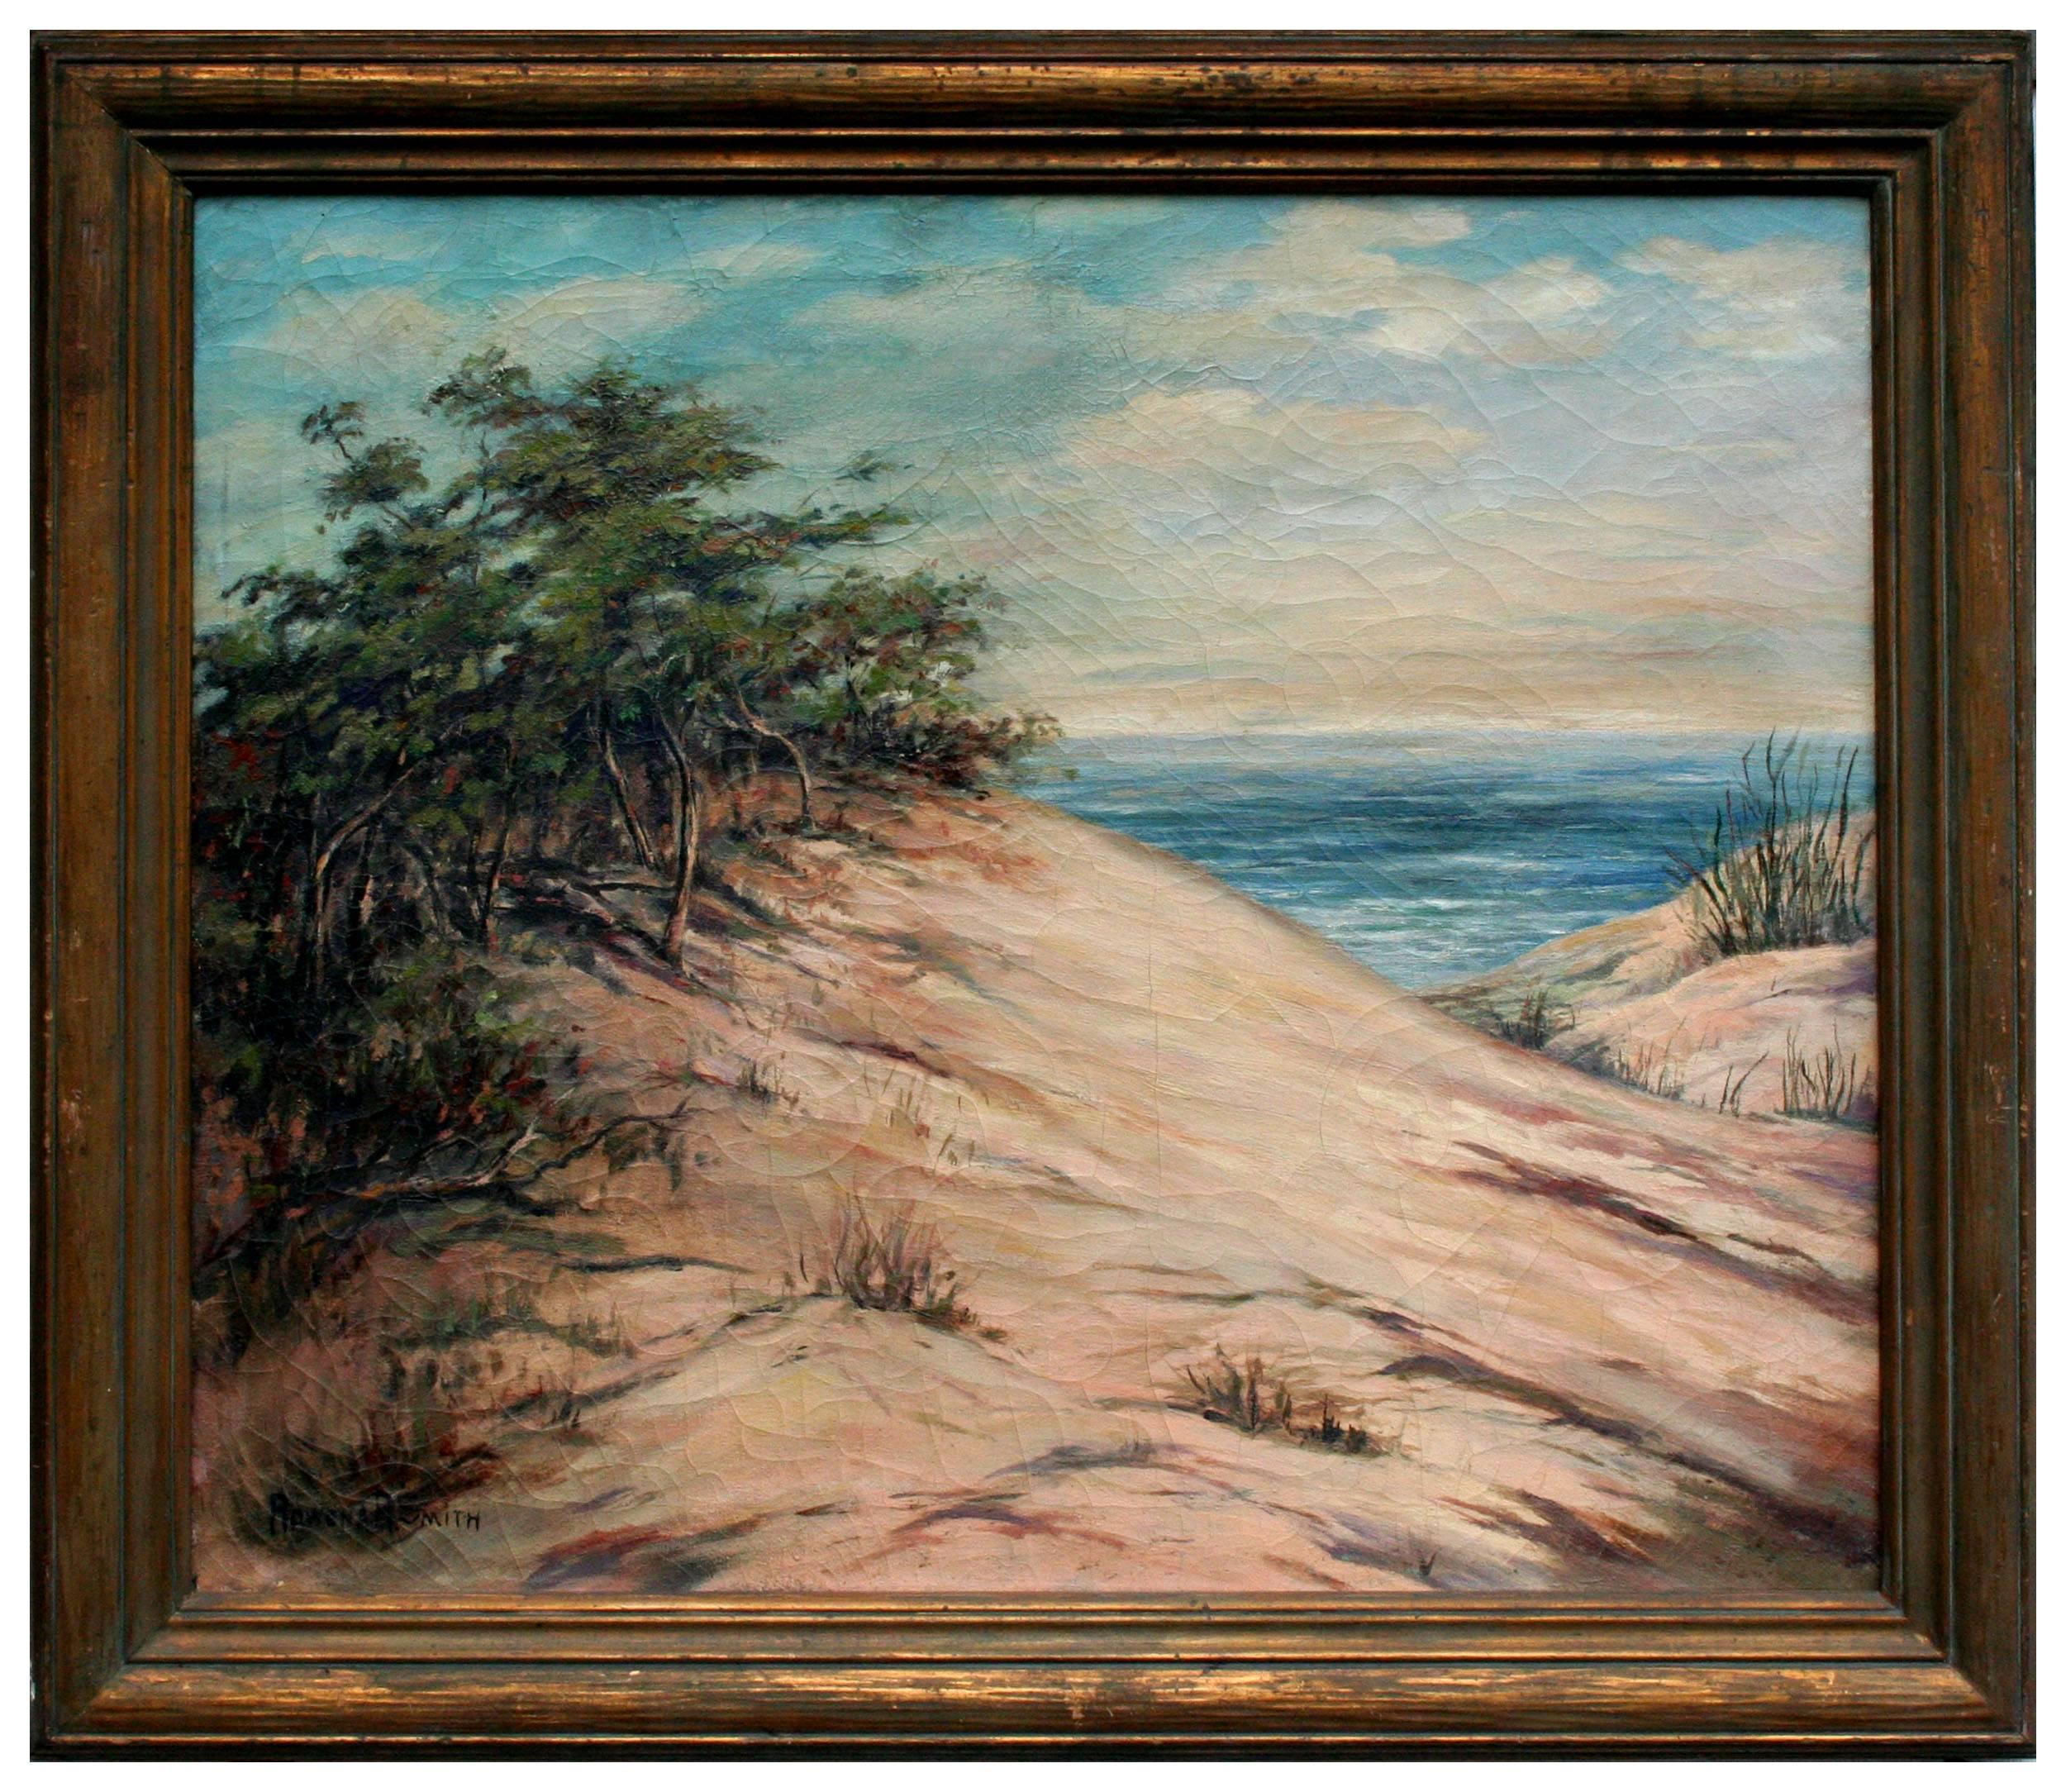 Rowena R. Smith Landscape Painting - Early 20th Century California Sand Dunes Landscape